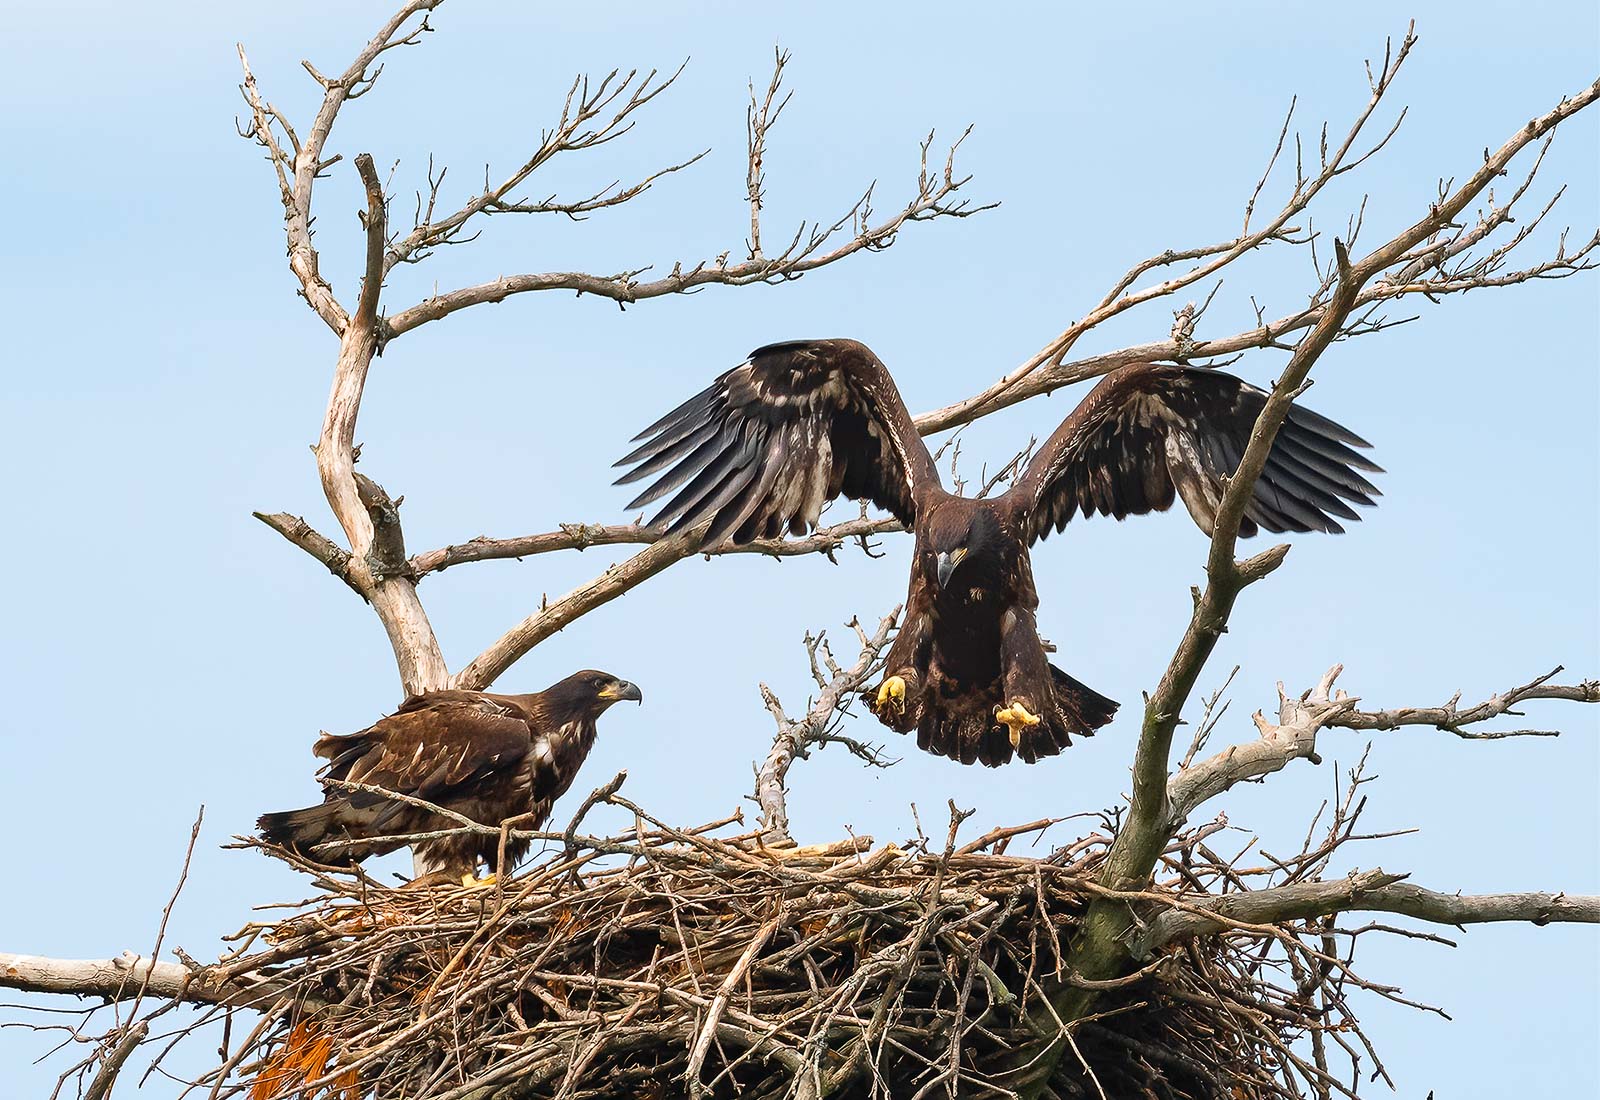 Eaglets watch each other while branching